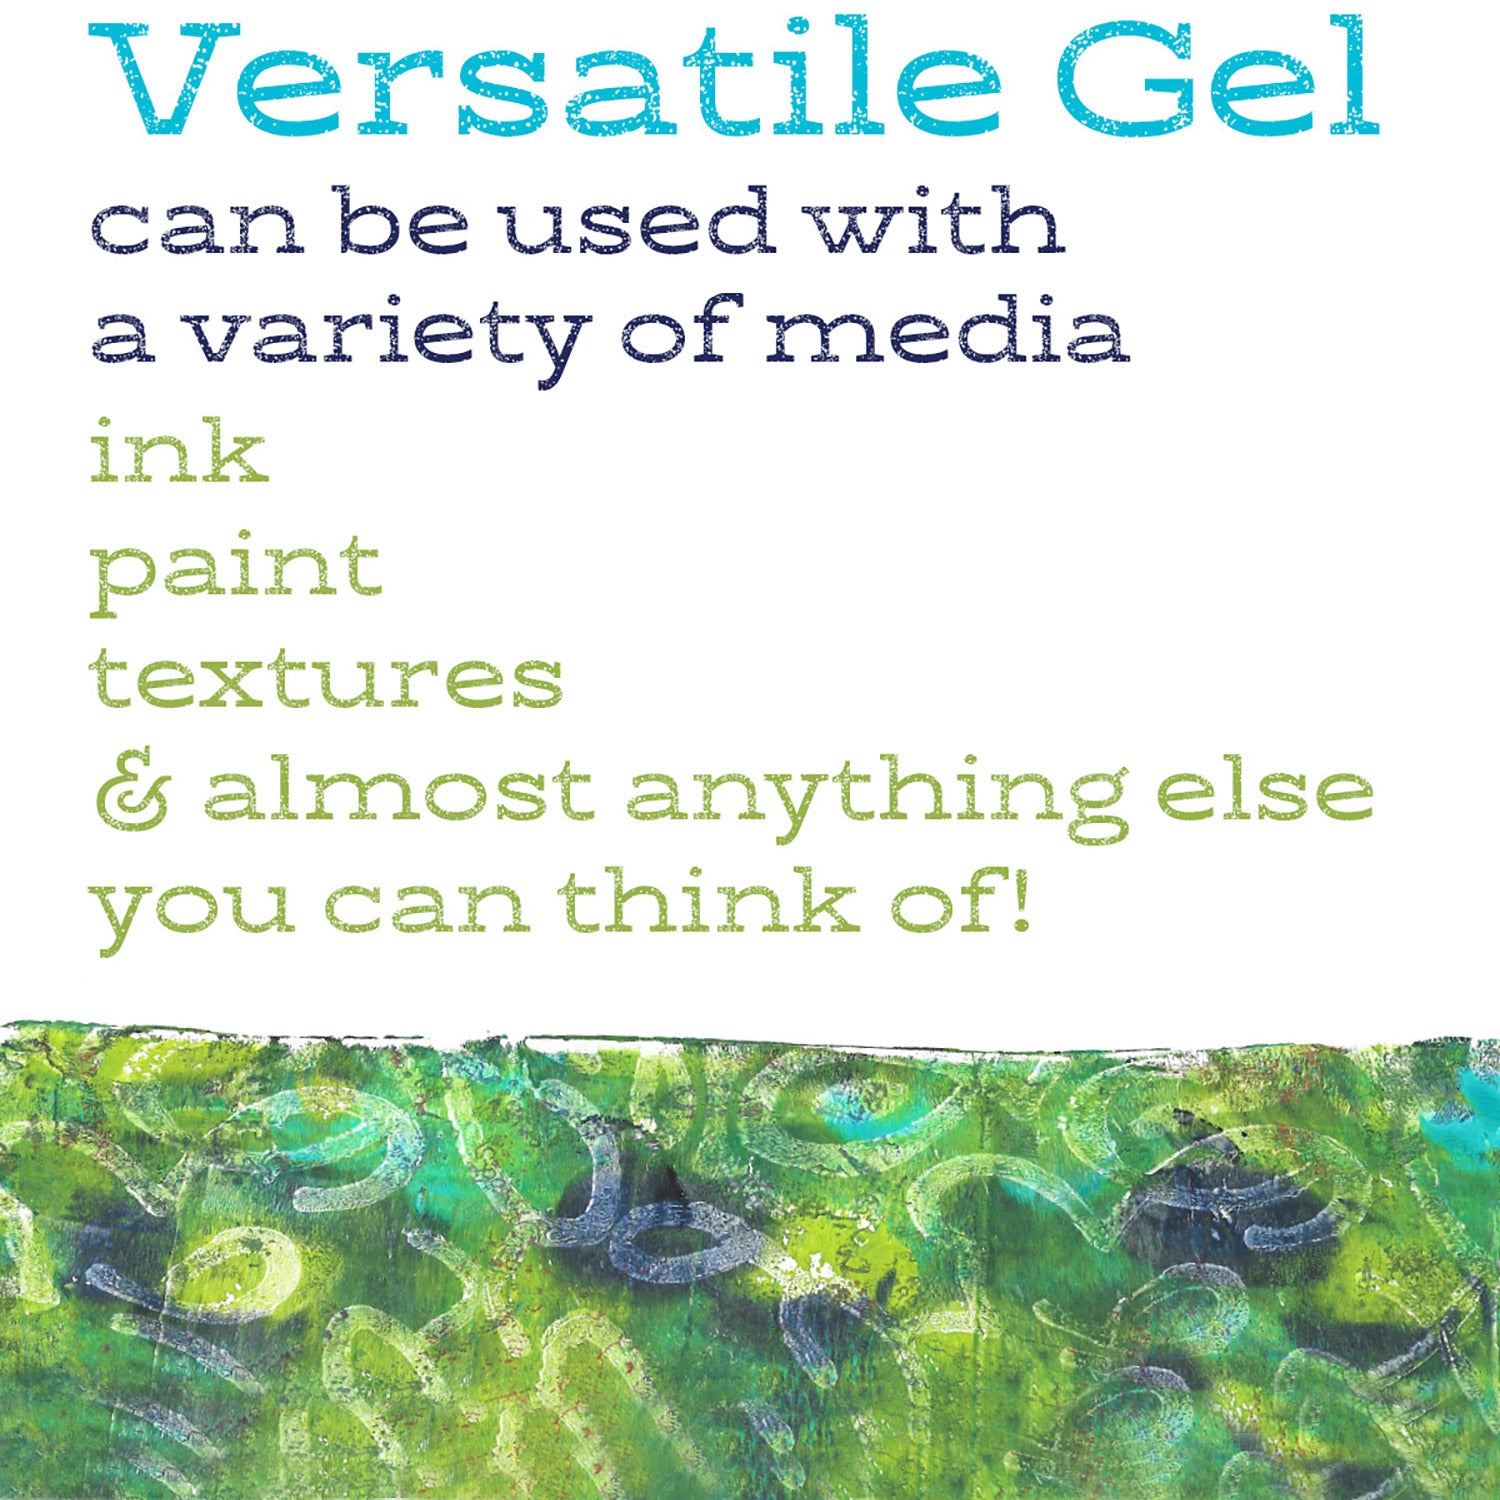 Versatile Gel Plates can be used with a variety of media ink and paint